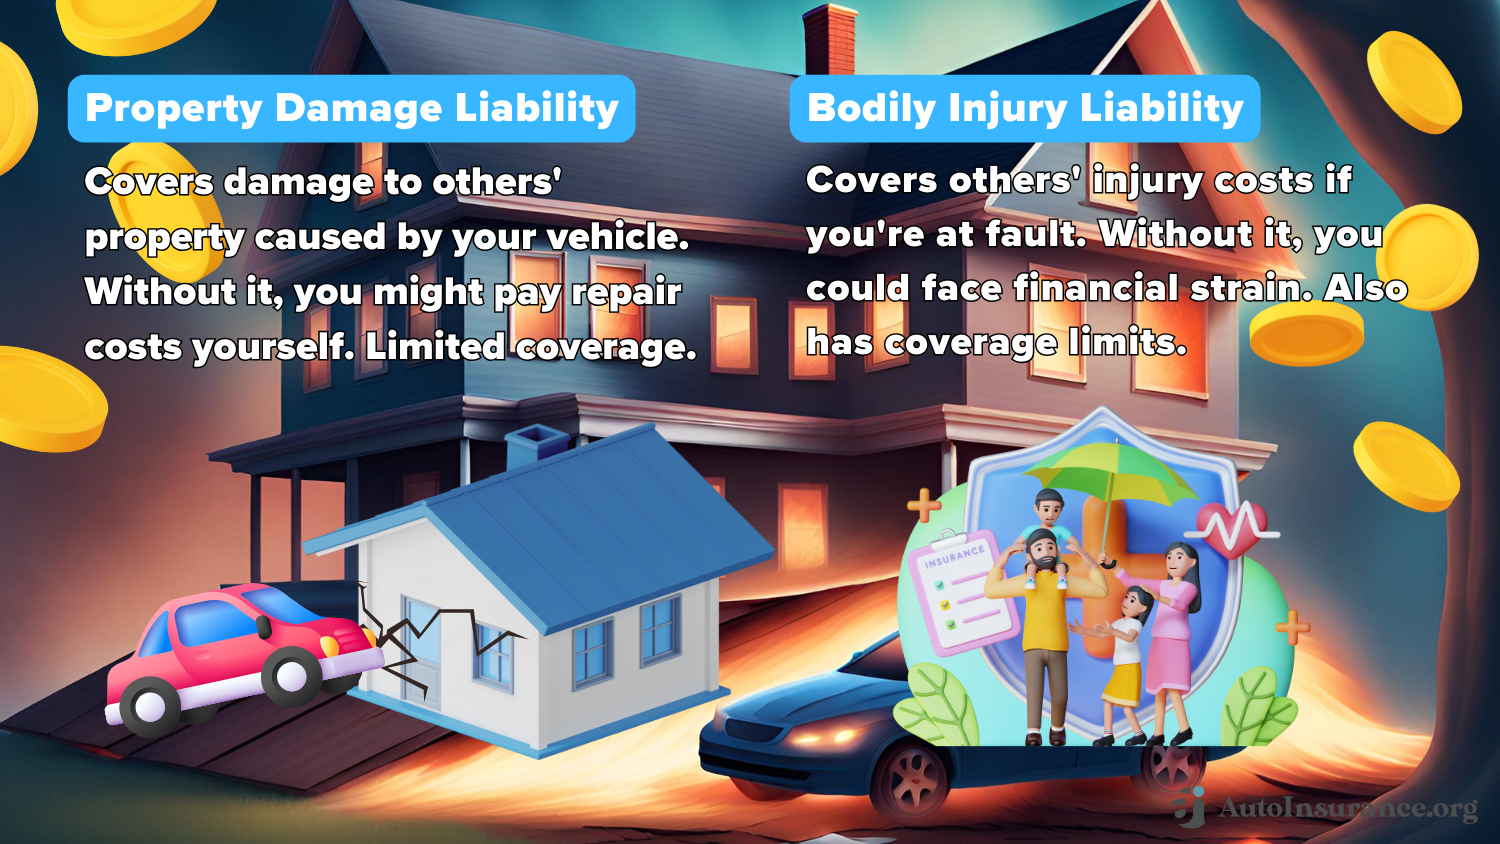 At-Fault Accident: Comparing Property Damage Liability vs. Bodily Injury Liability